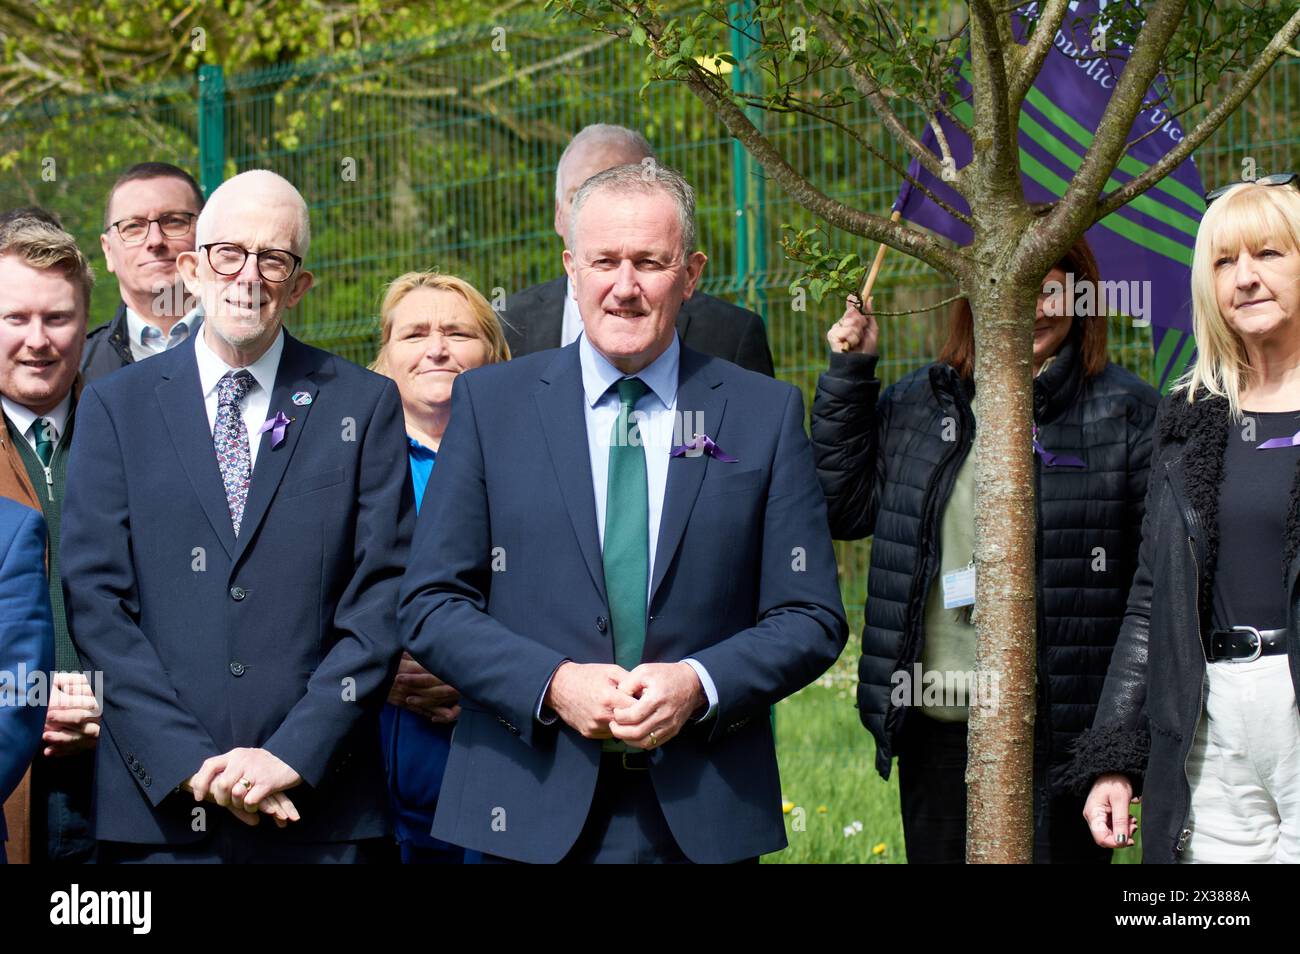 Belfast, United Kingdom 25 04 2024 Irish Congress of Trade Unions hold wreath laying event at Stormont estate to mark Workers Memorial Day. Minister of the Economy Conor Murphy participated in the event alongside representatives from trade unions in Northern Ireland Belfast Northern Ireland Credit: HeadlineX/Alamy Live News Stock Photo